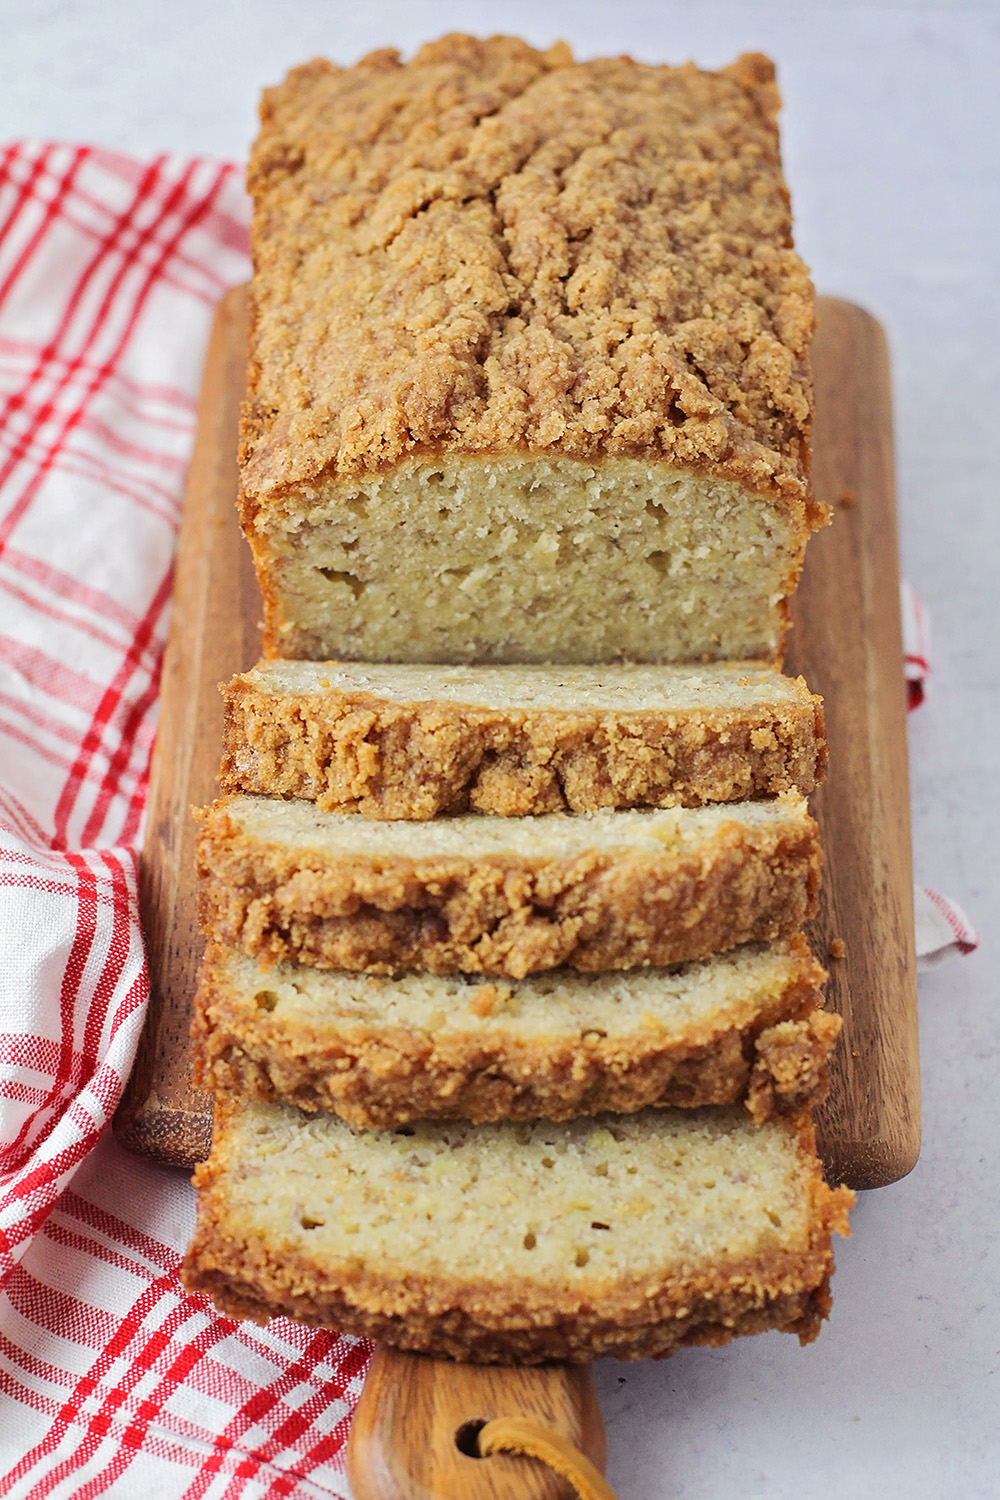 This sweet and tender cinnamon streusel banana bread is full of delicious flavors. It's the perfect cozy fall bake!  